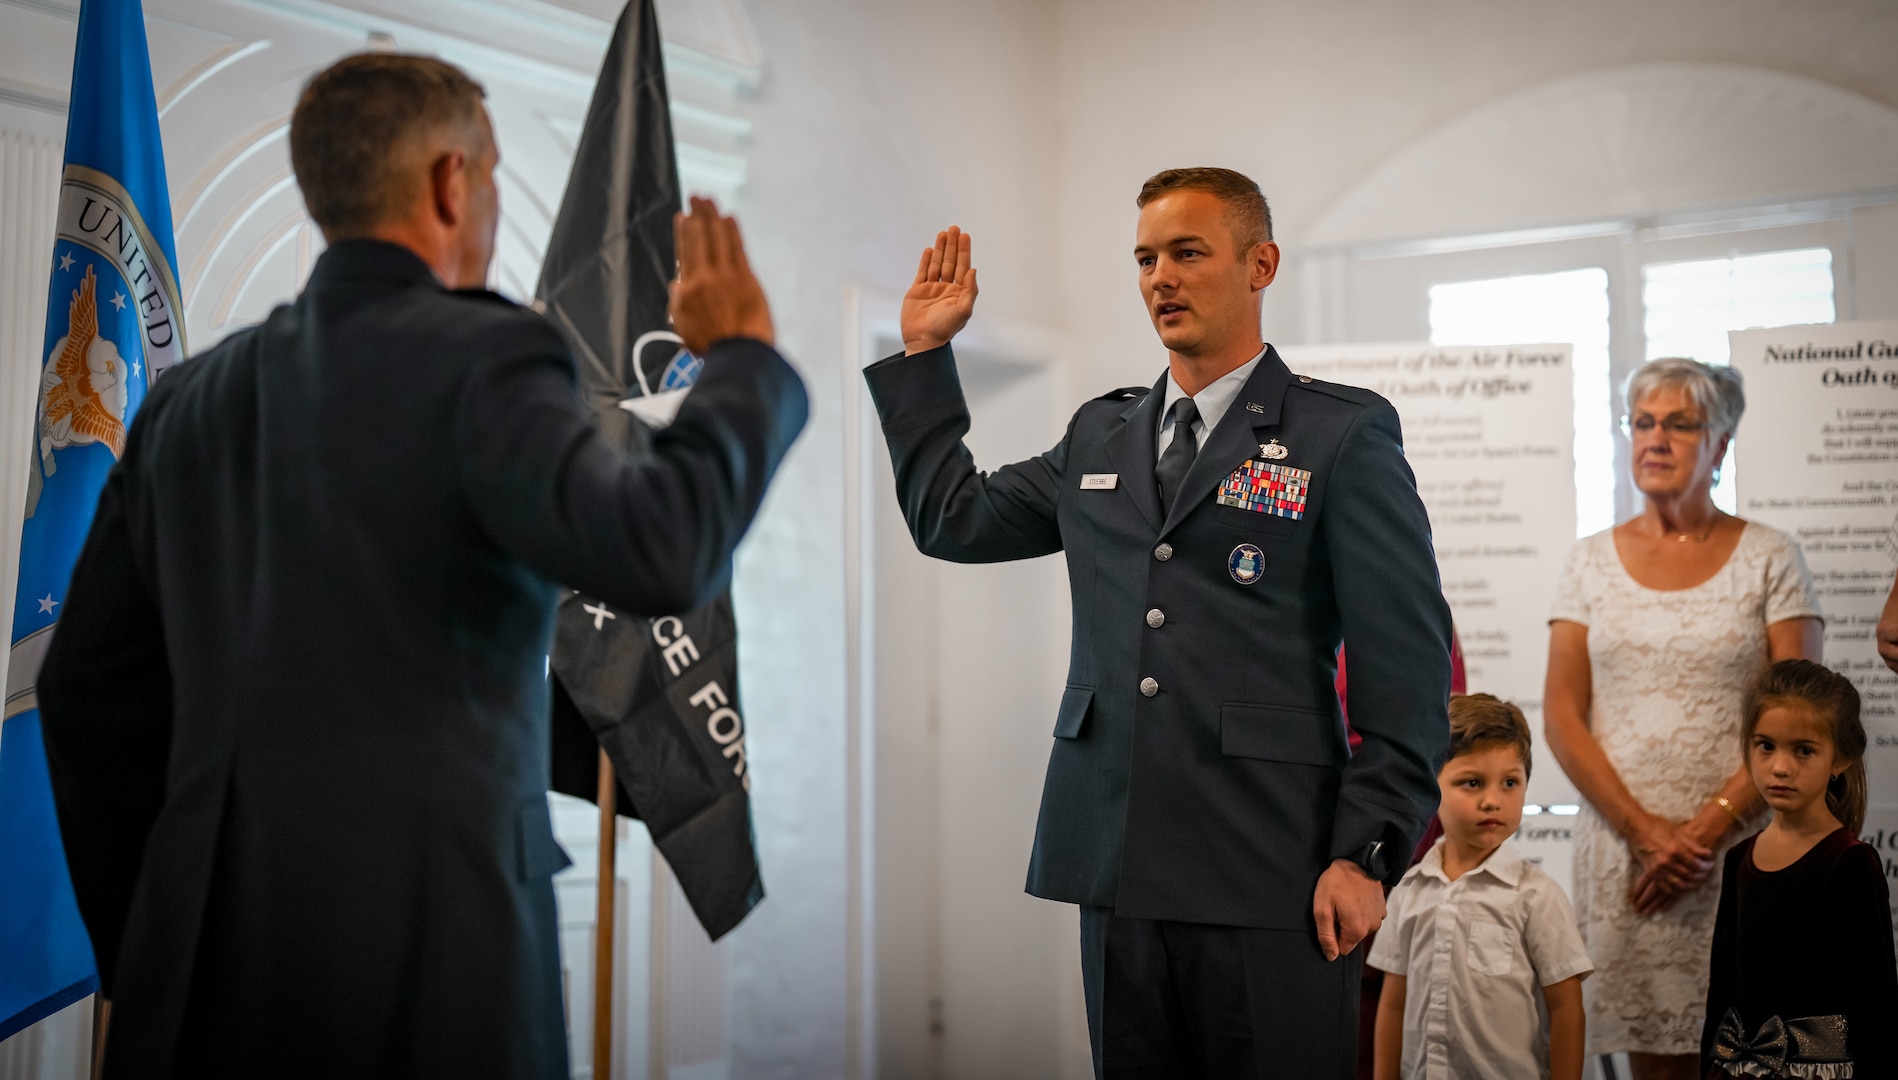 With right hand raised, an Air Force Officer repeats the Oath of Office during a ceremony.